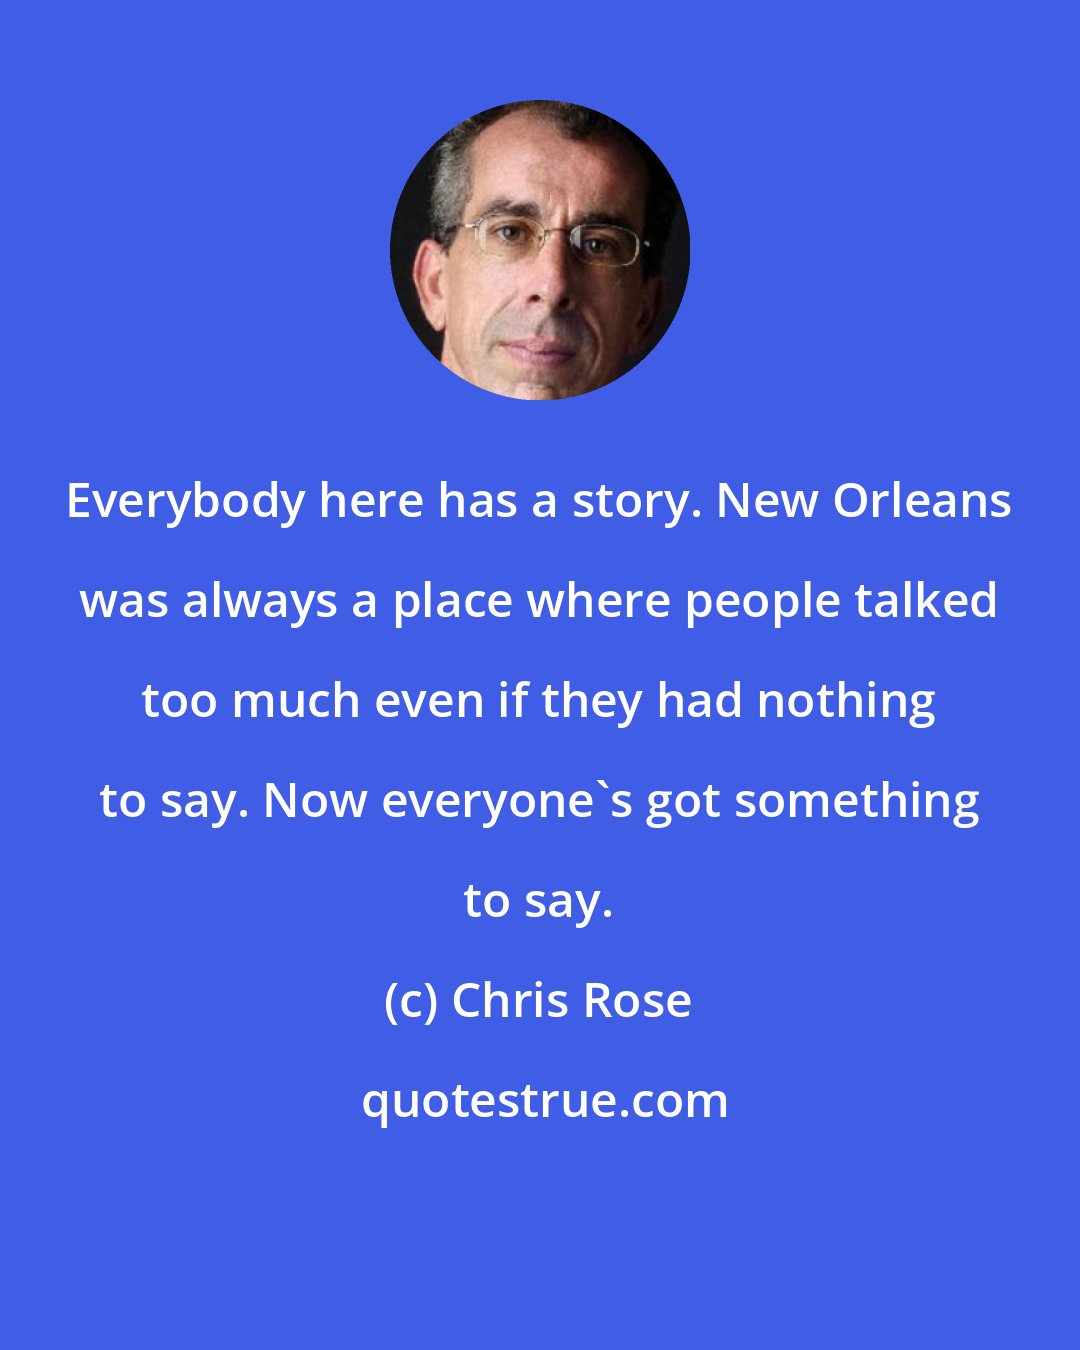 Chris Rose: Everybody here has a story. New Orleans was always a place where people talked too much even if they had nothing to say. Now everyone's got something to say.